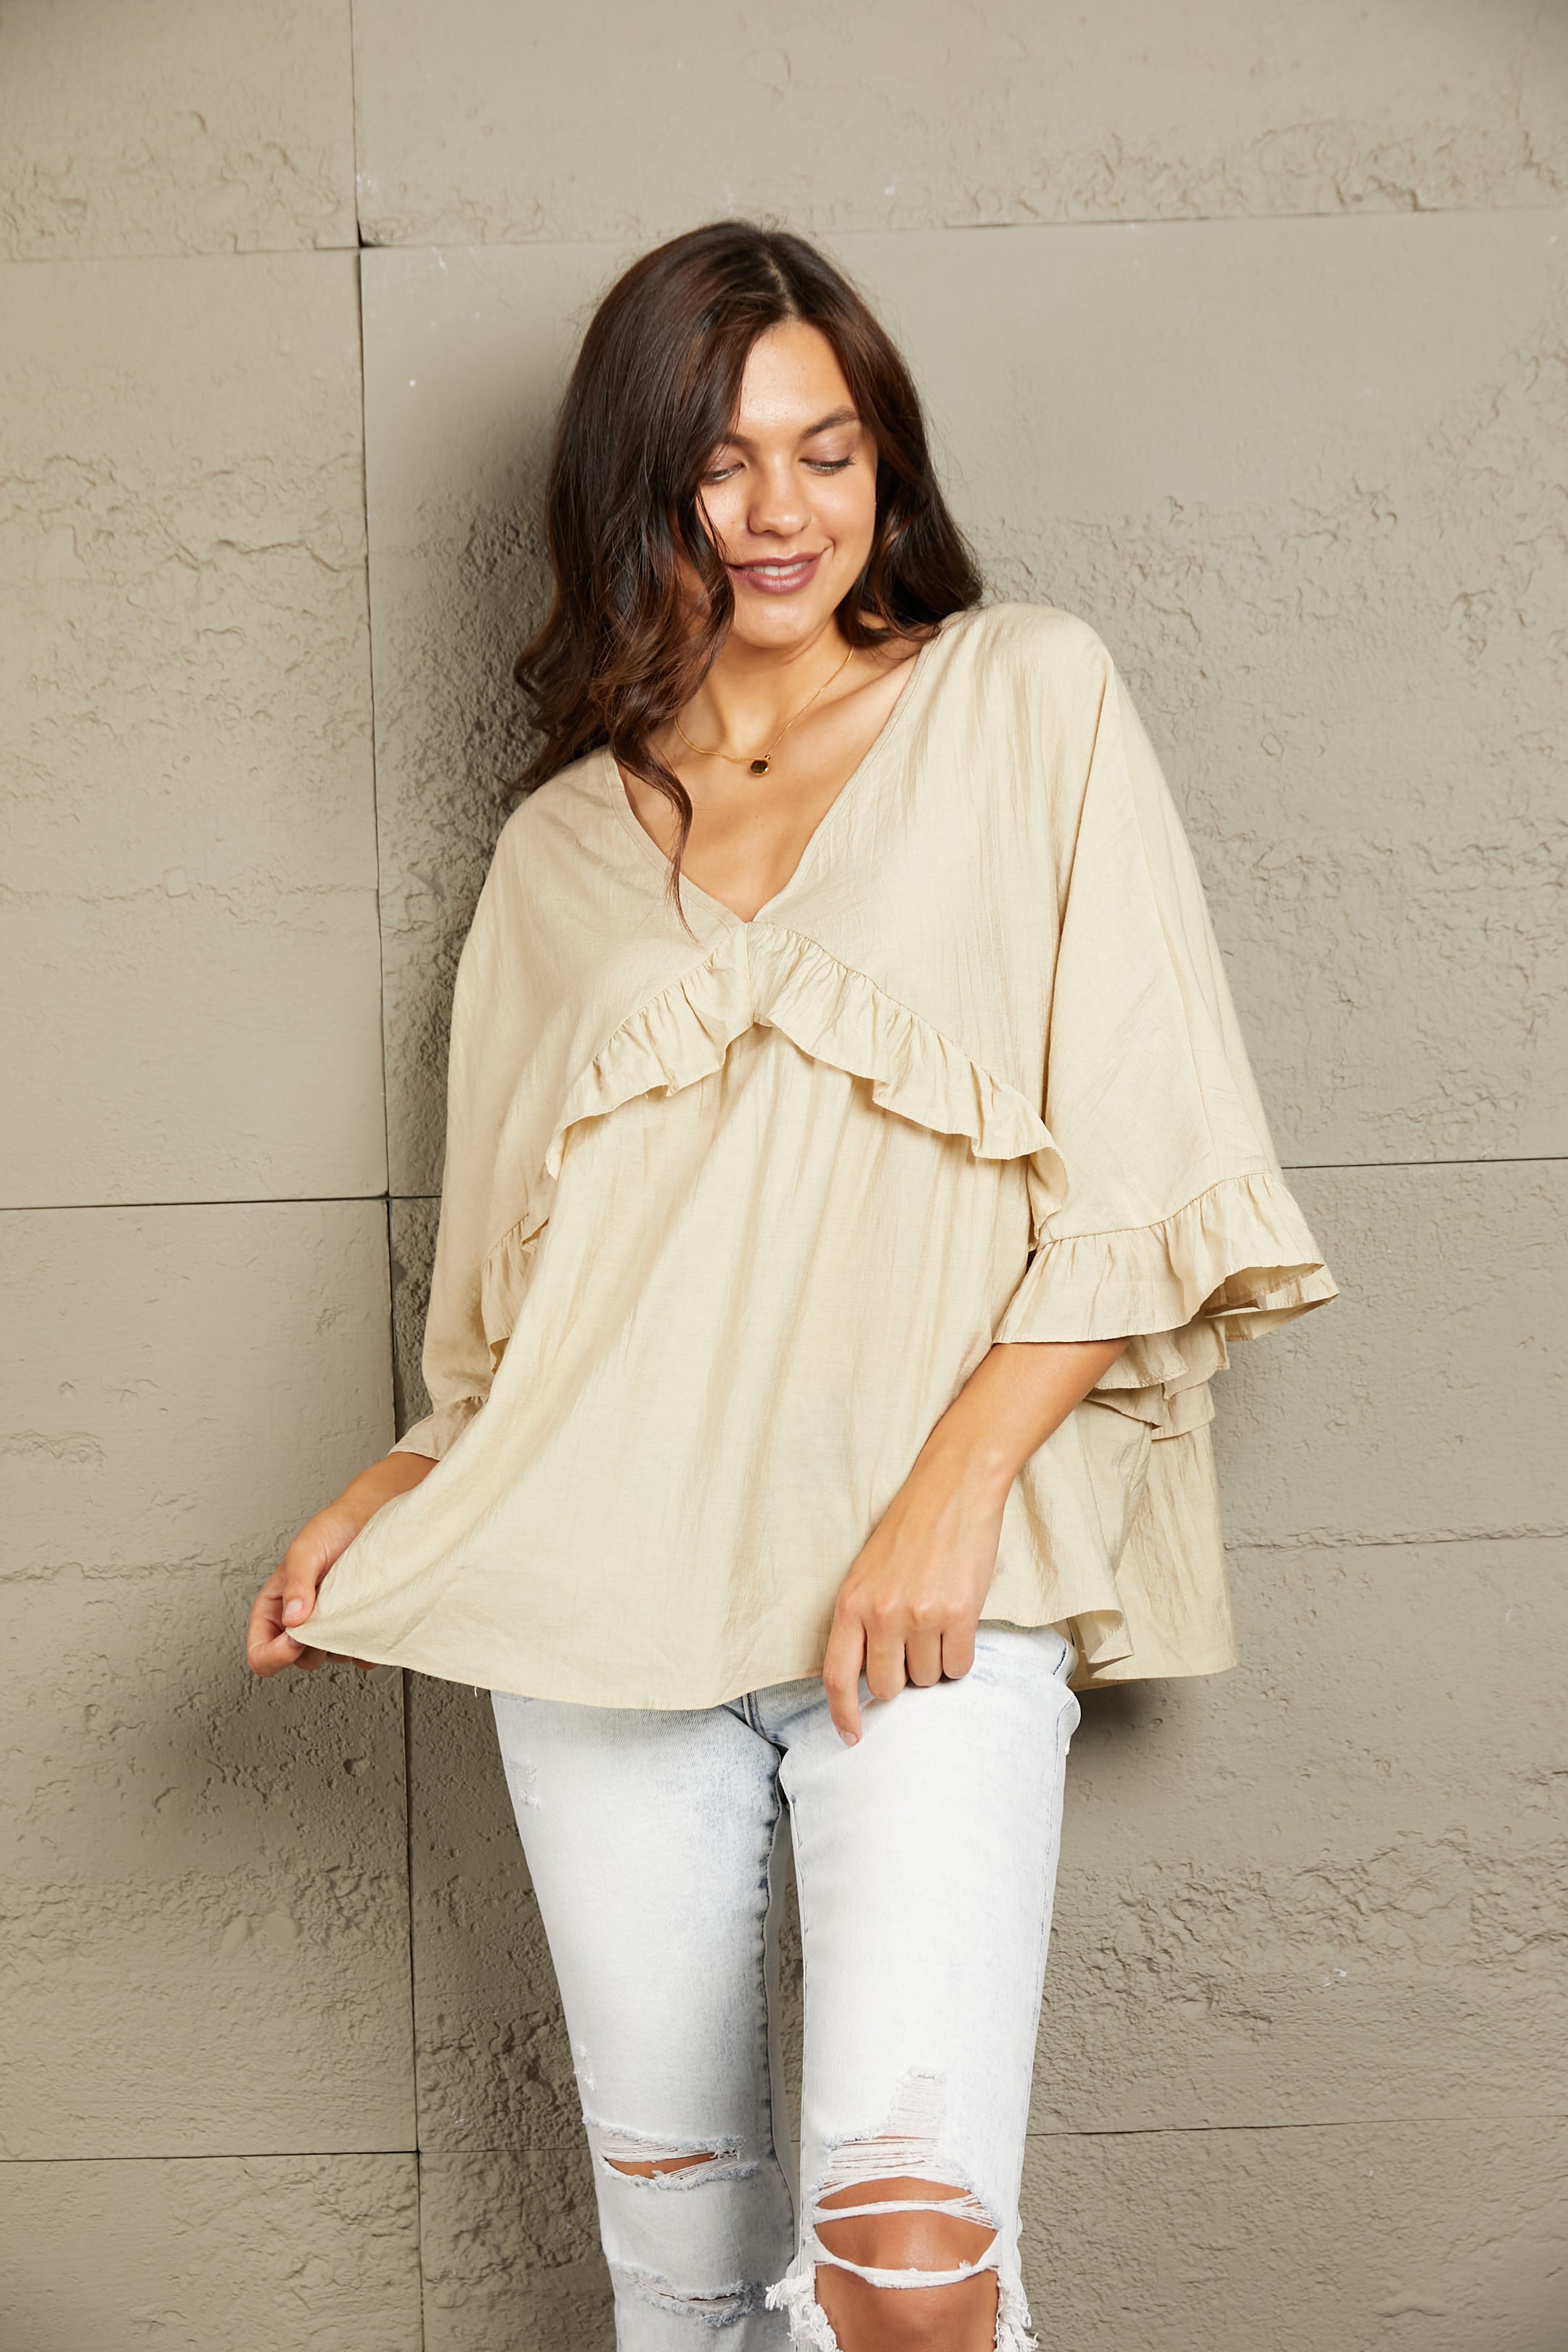 Double Take Ruffled V-Neck Half Sleeve Blouse  Krazy Heart Designs Boutique   